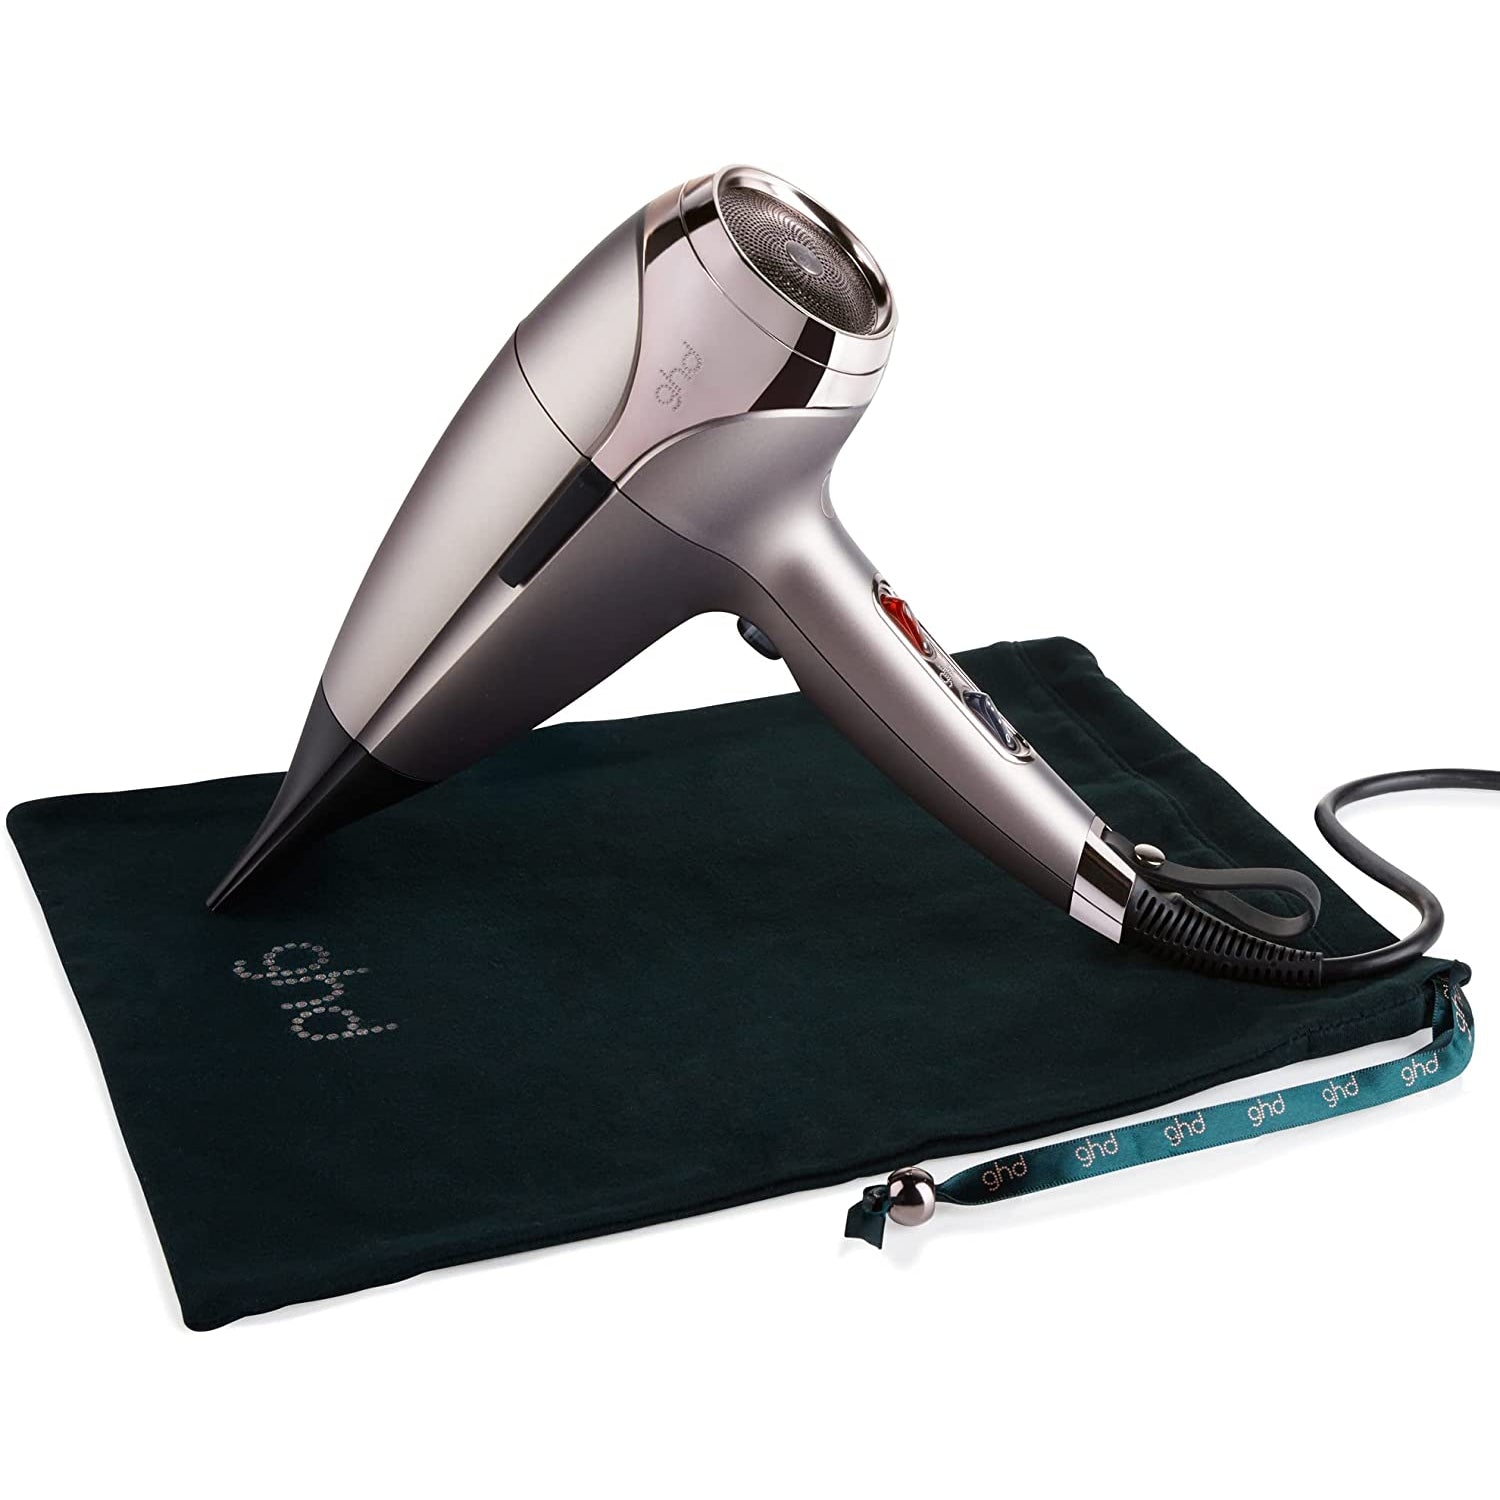 Ghd Helios Professional Hairdryer Gift Set - Warm Pewter